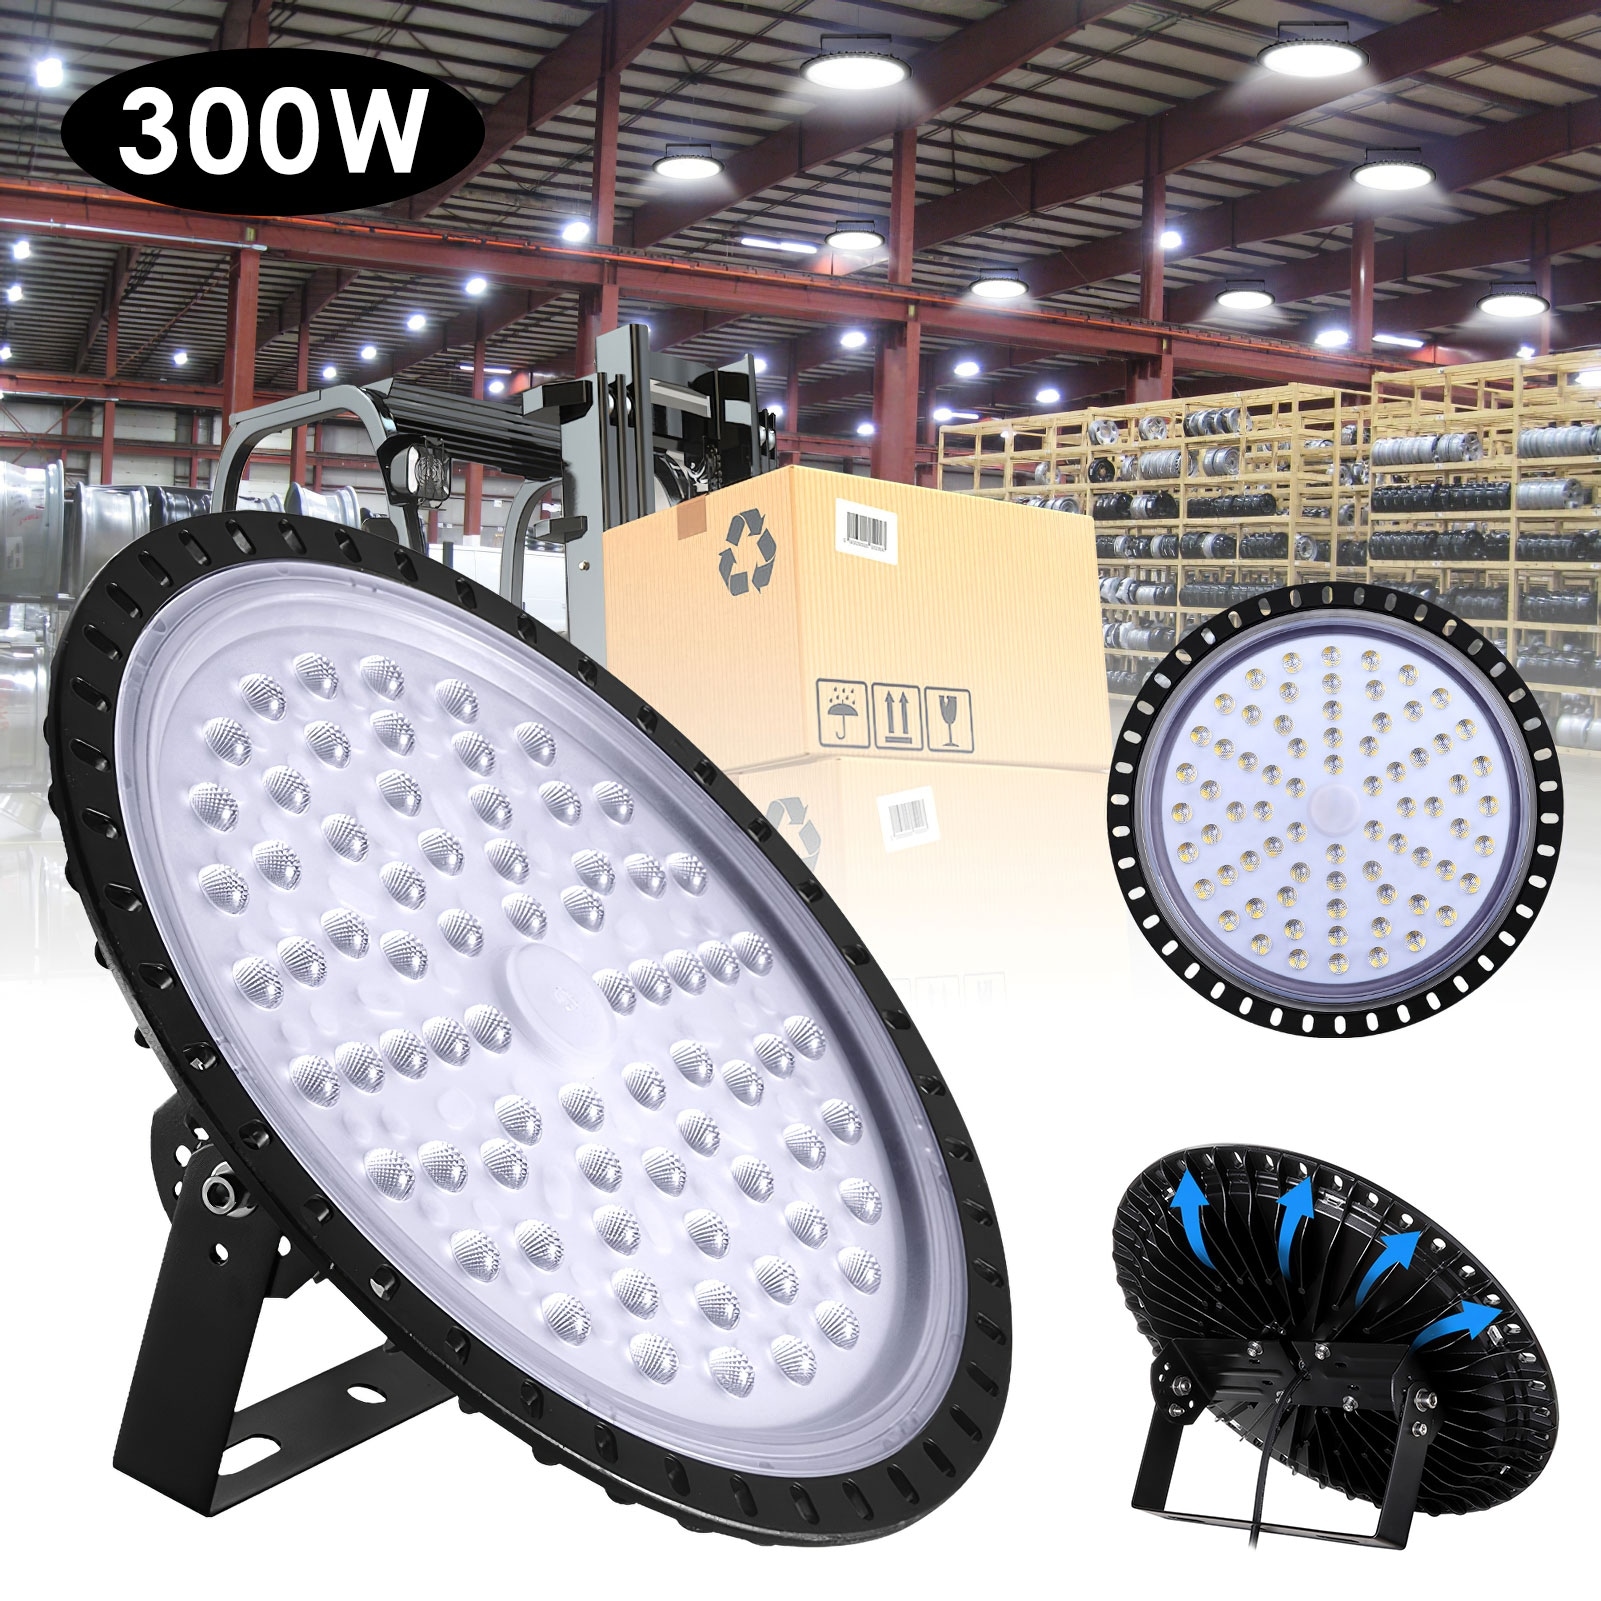 50W/100W/200/300W LED High Bay Light Industrial Warehouse Factory Workshop Lamp 